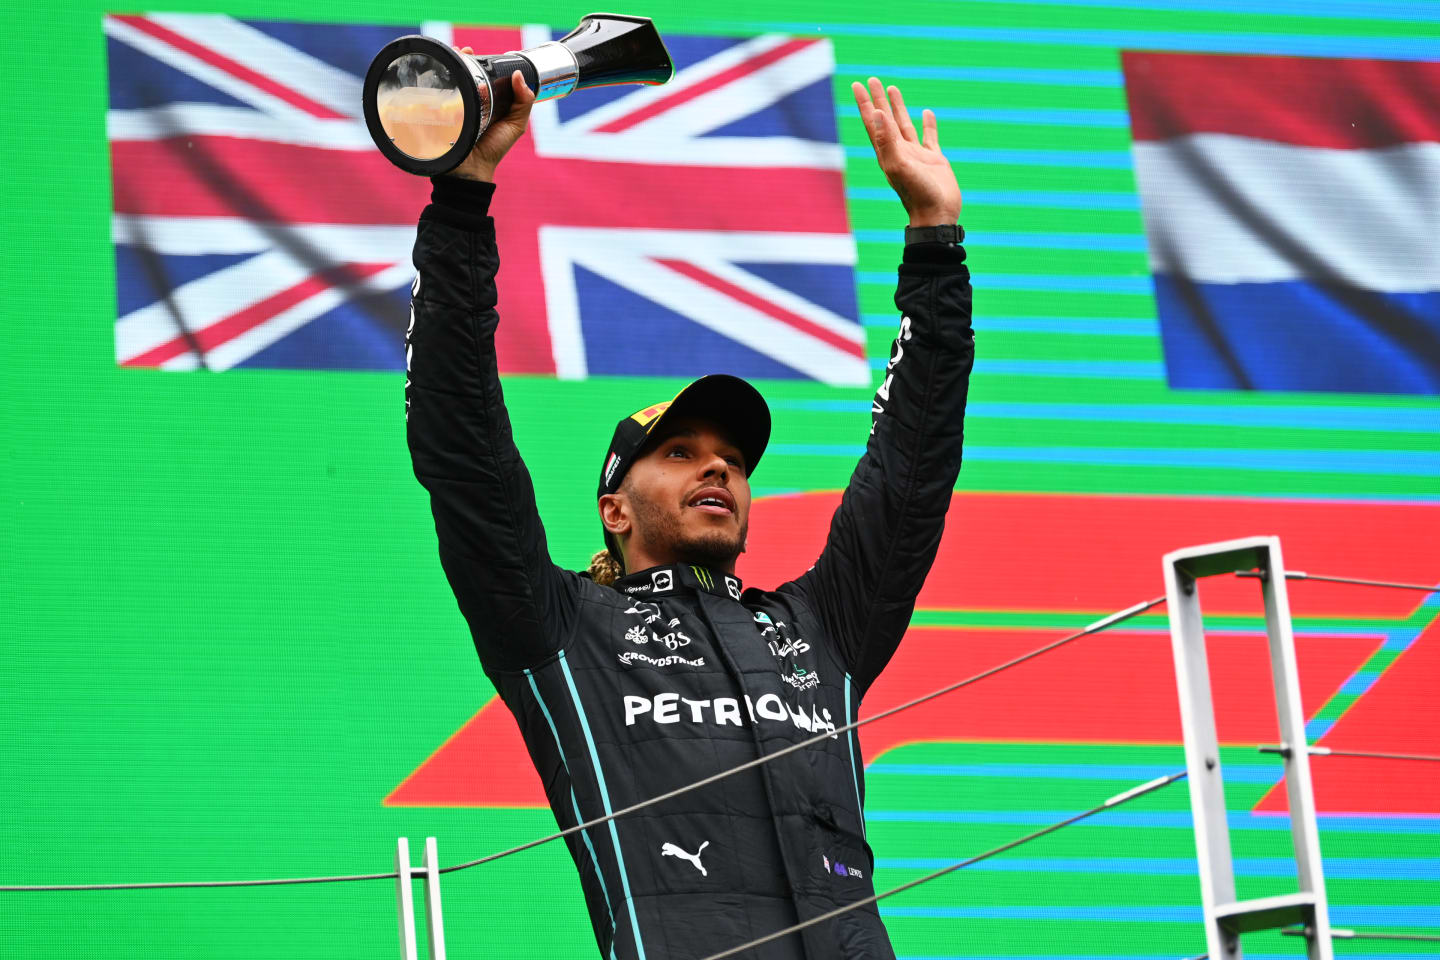 BUDAPEST, HUNGARY - JULY 31: Second placed Lewis Hamilton of Great Britain and Mercedes celebrates